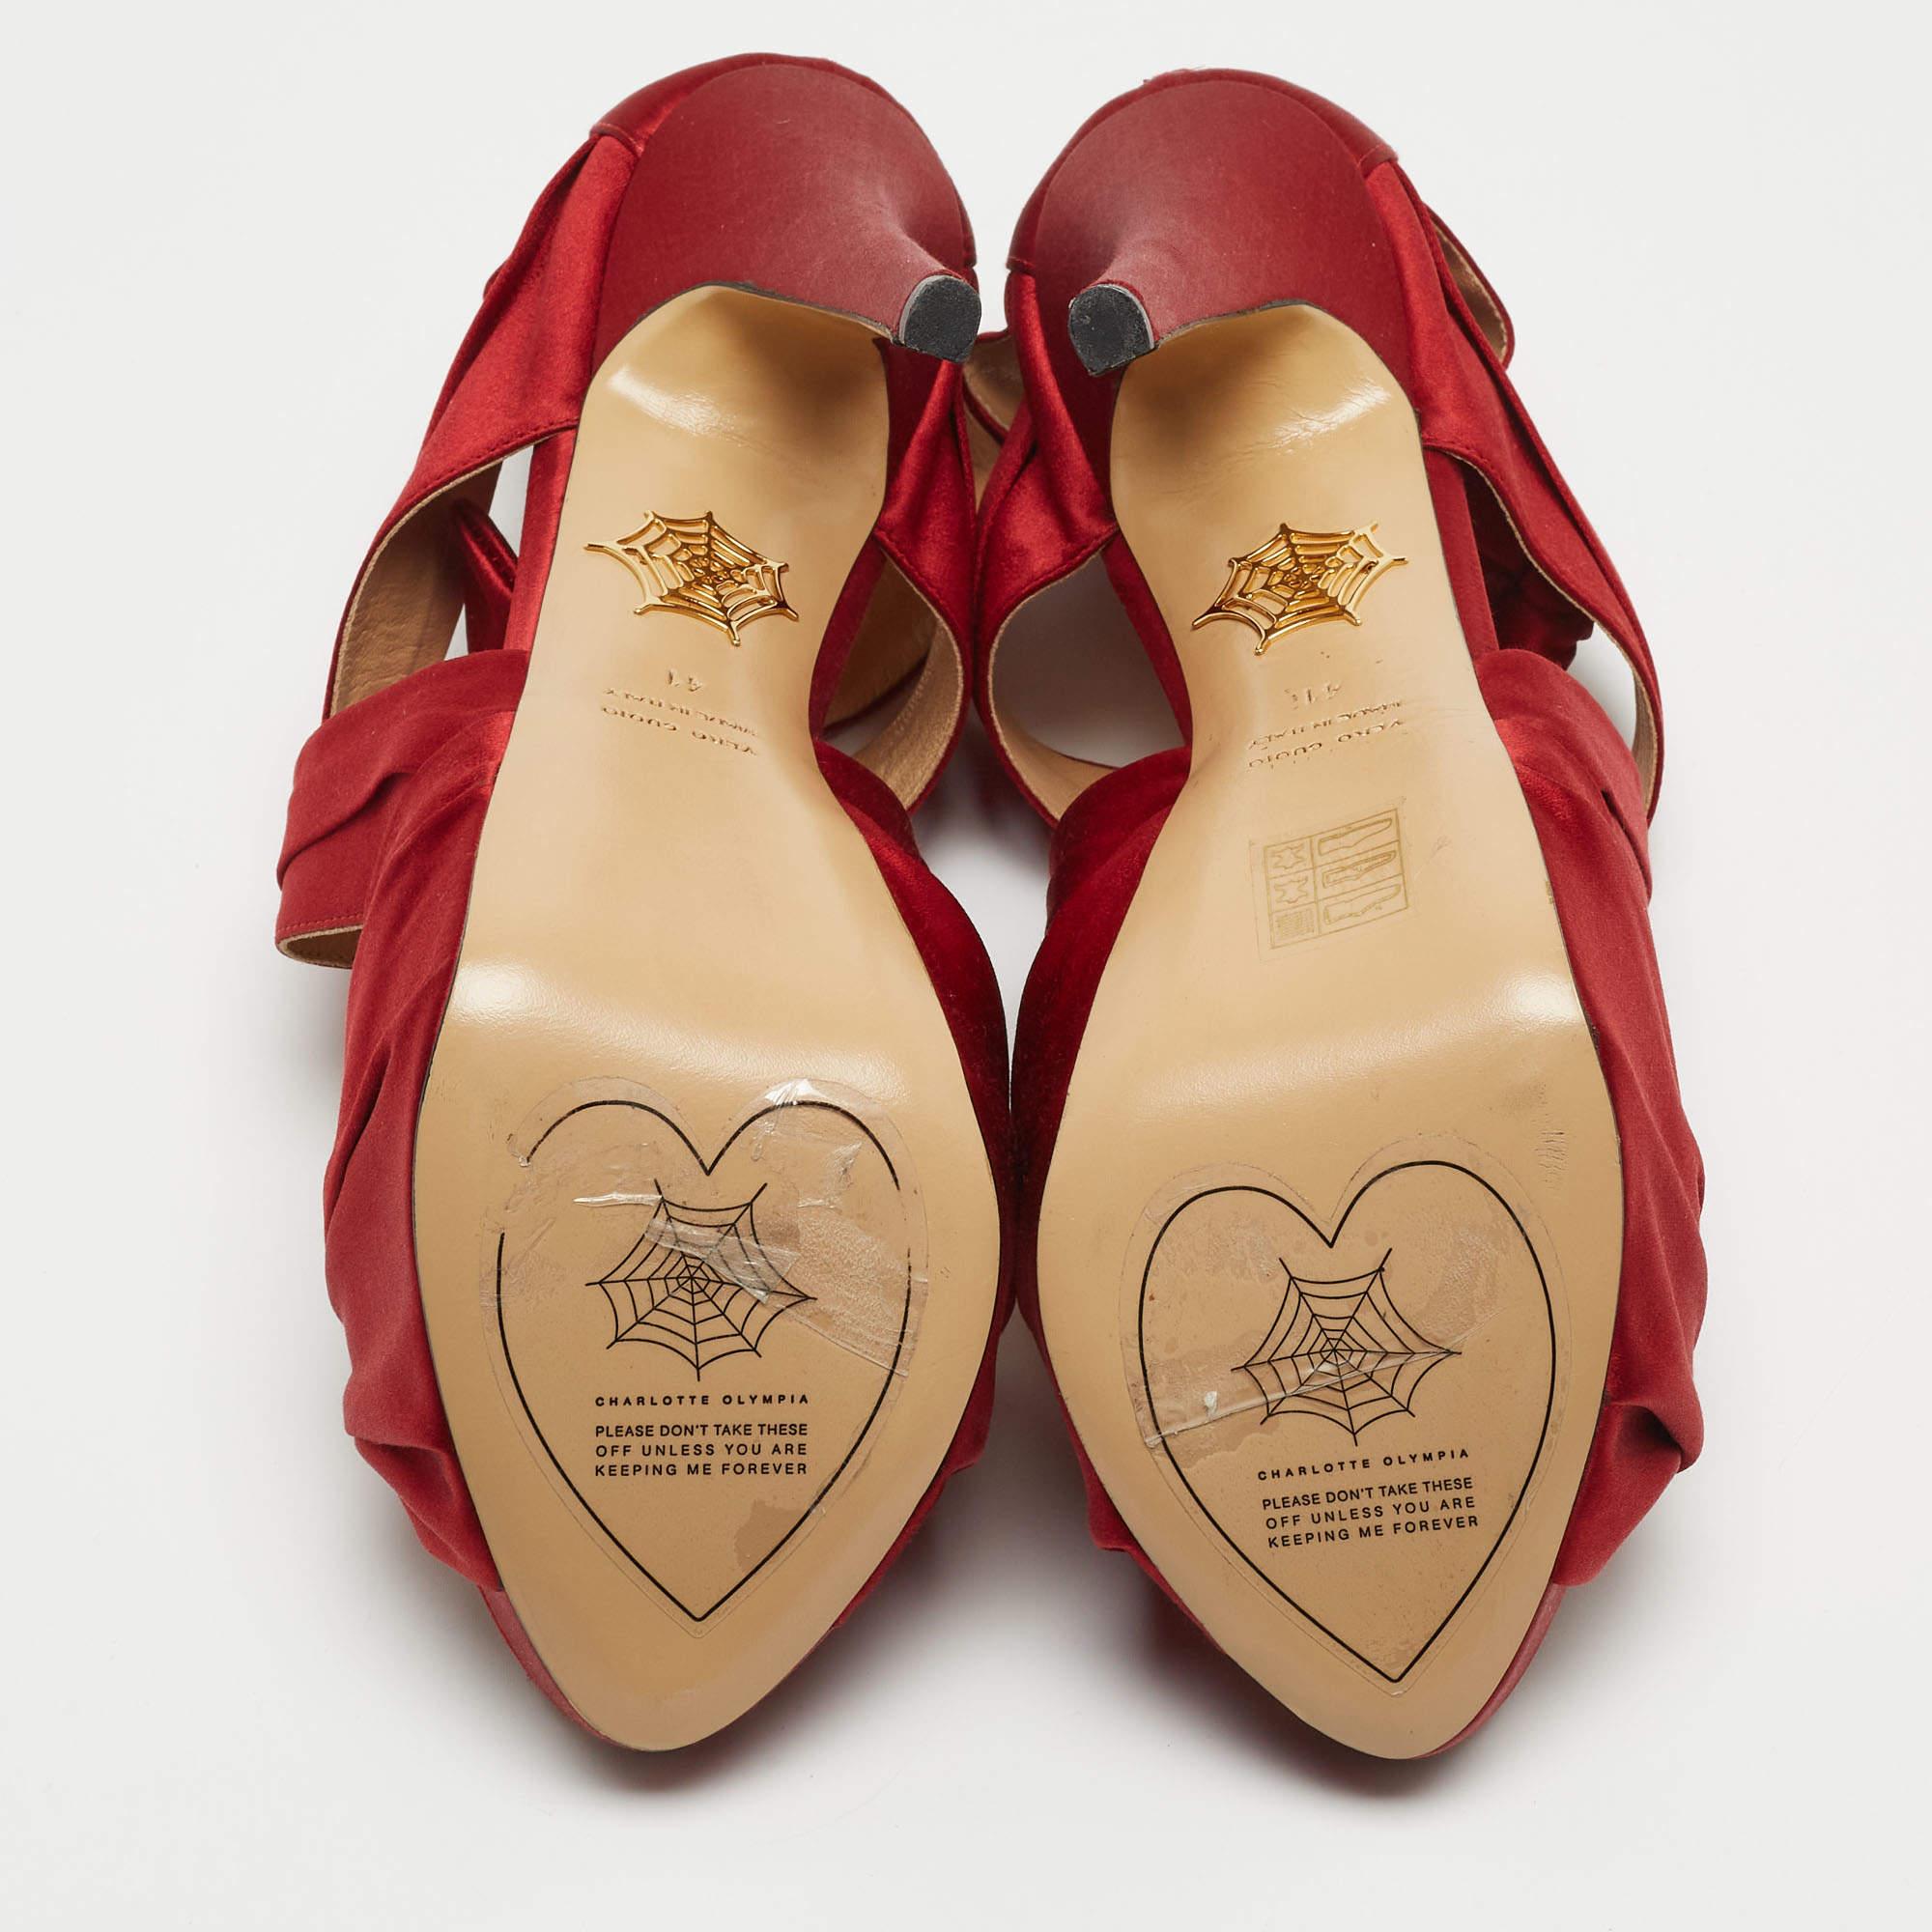 Charlotte Olympia Red Satin Andrea Knotted Platform Sandals Size 41 1